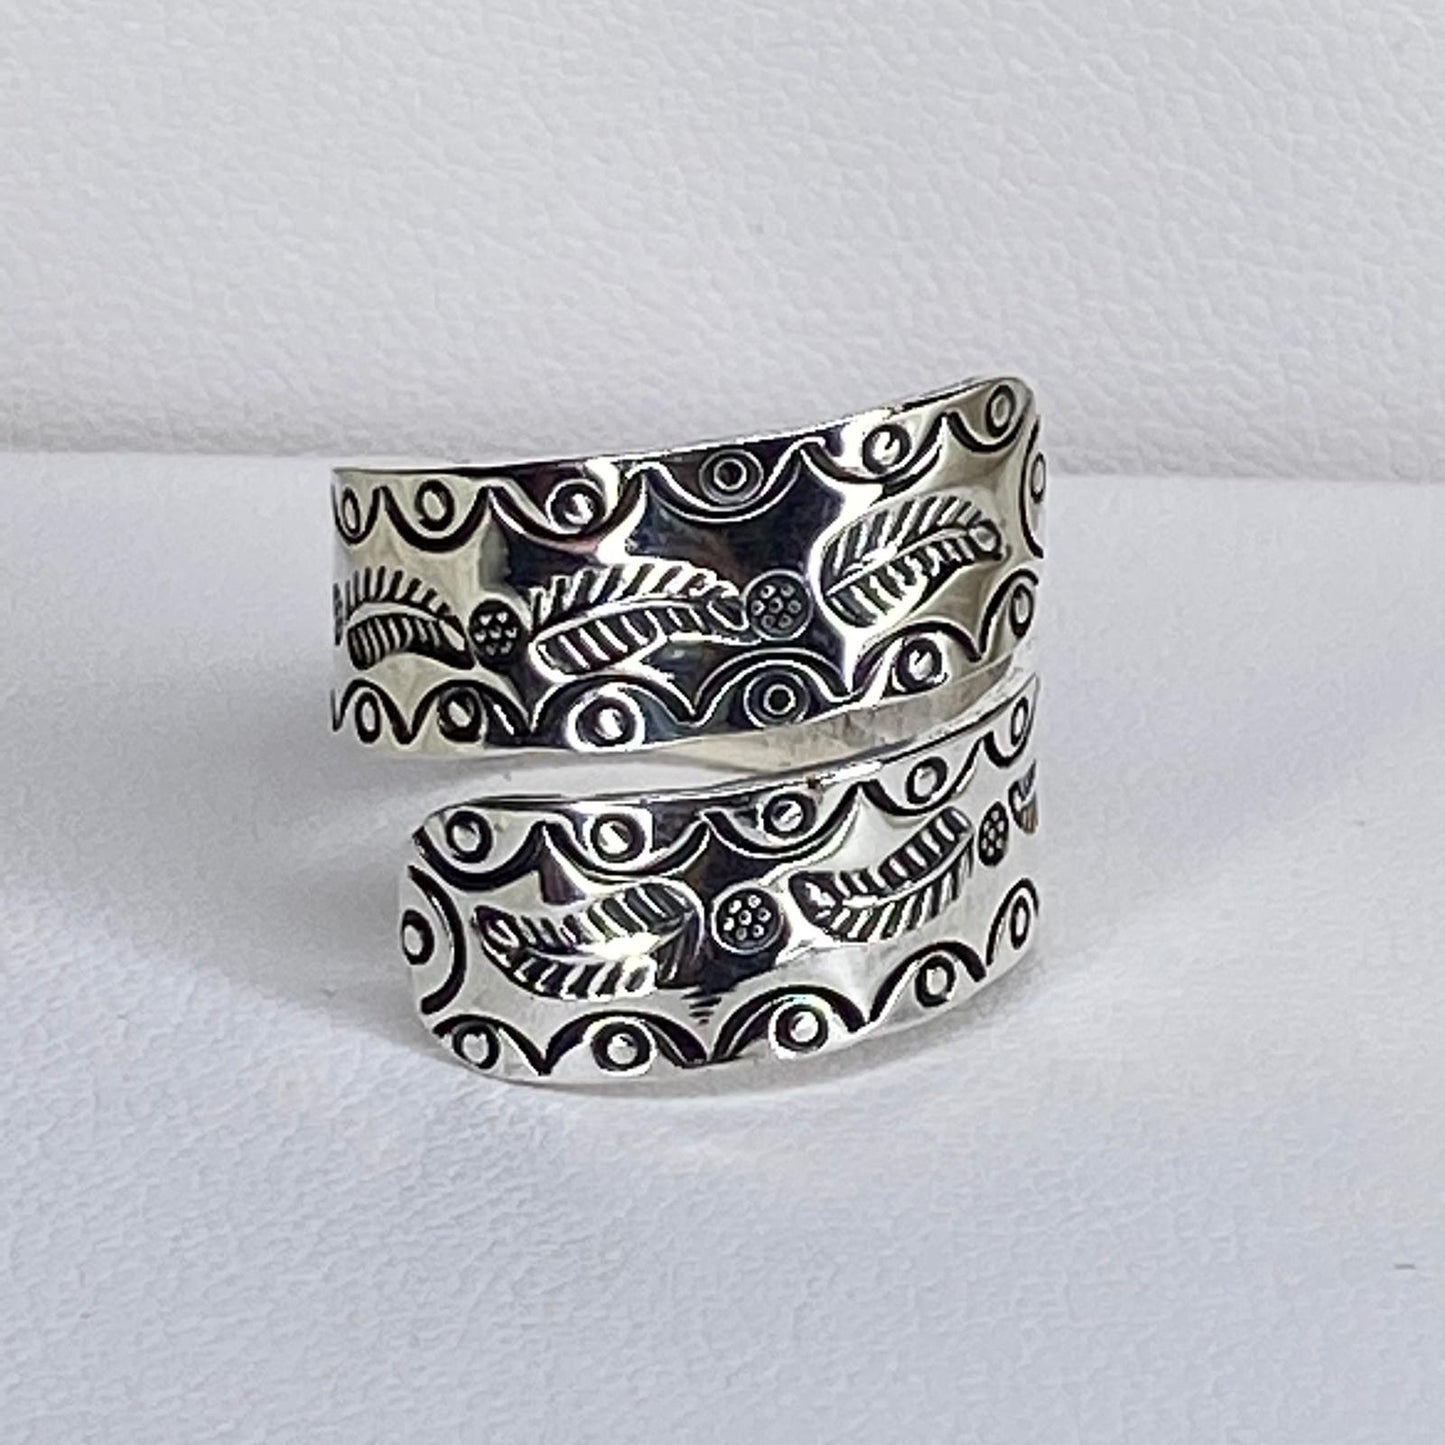 Indy Patterned Ring